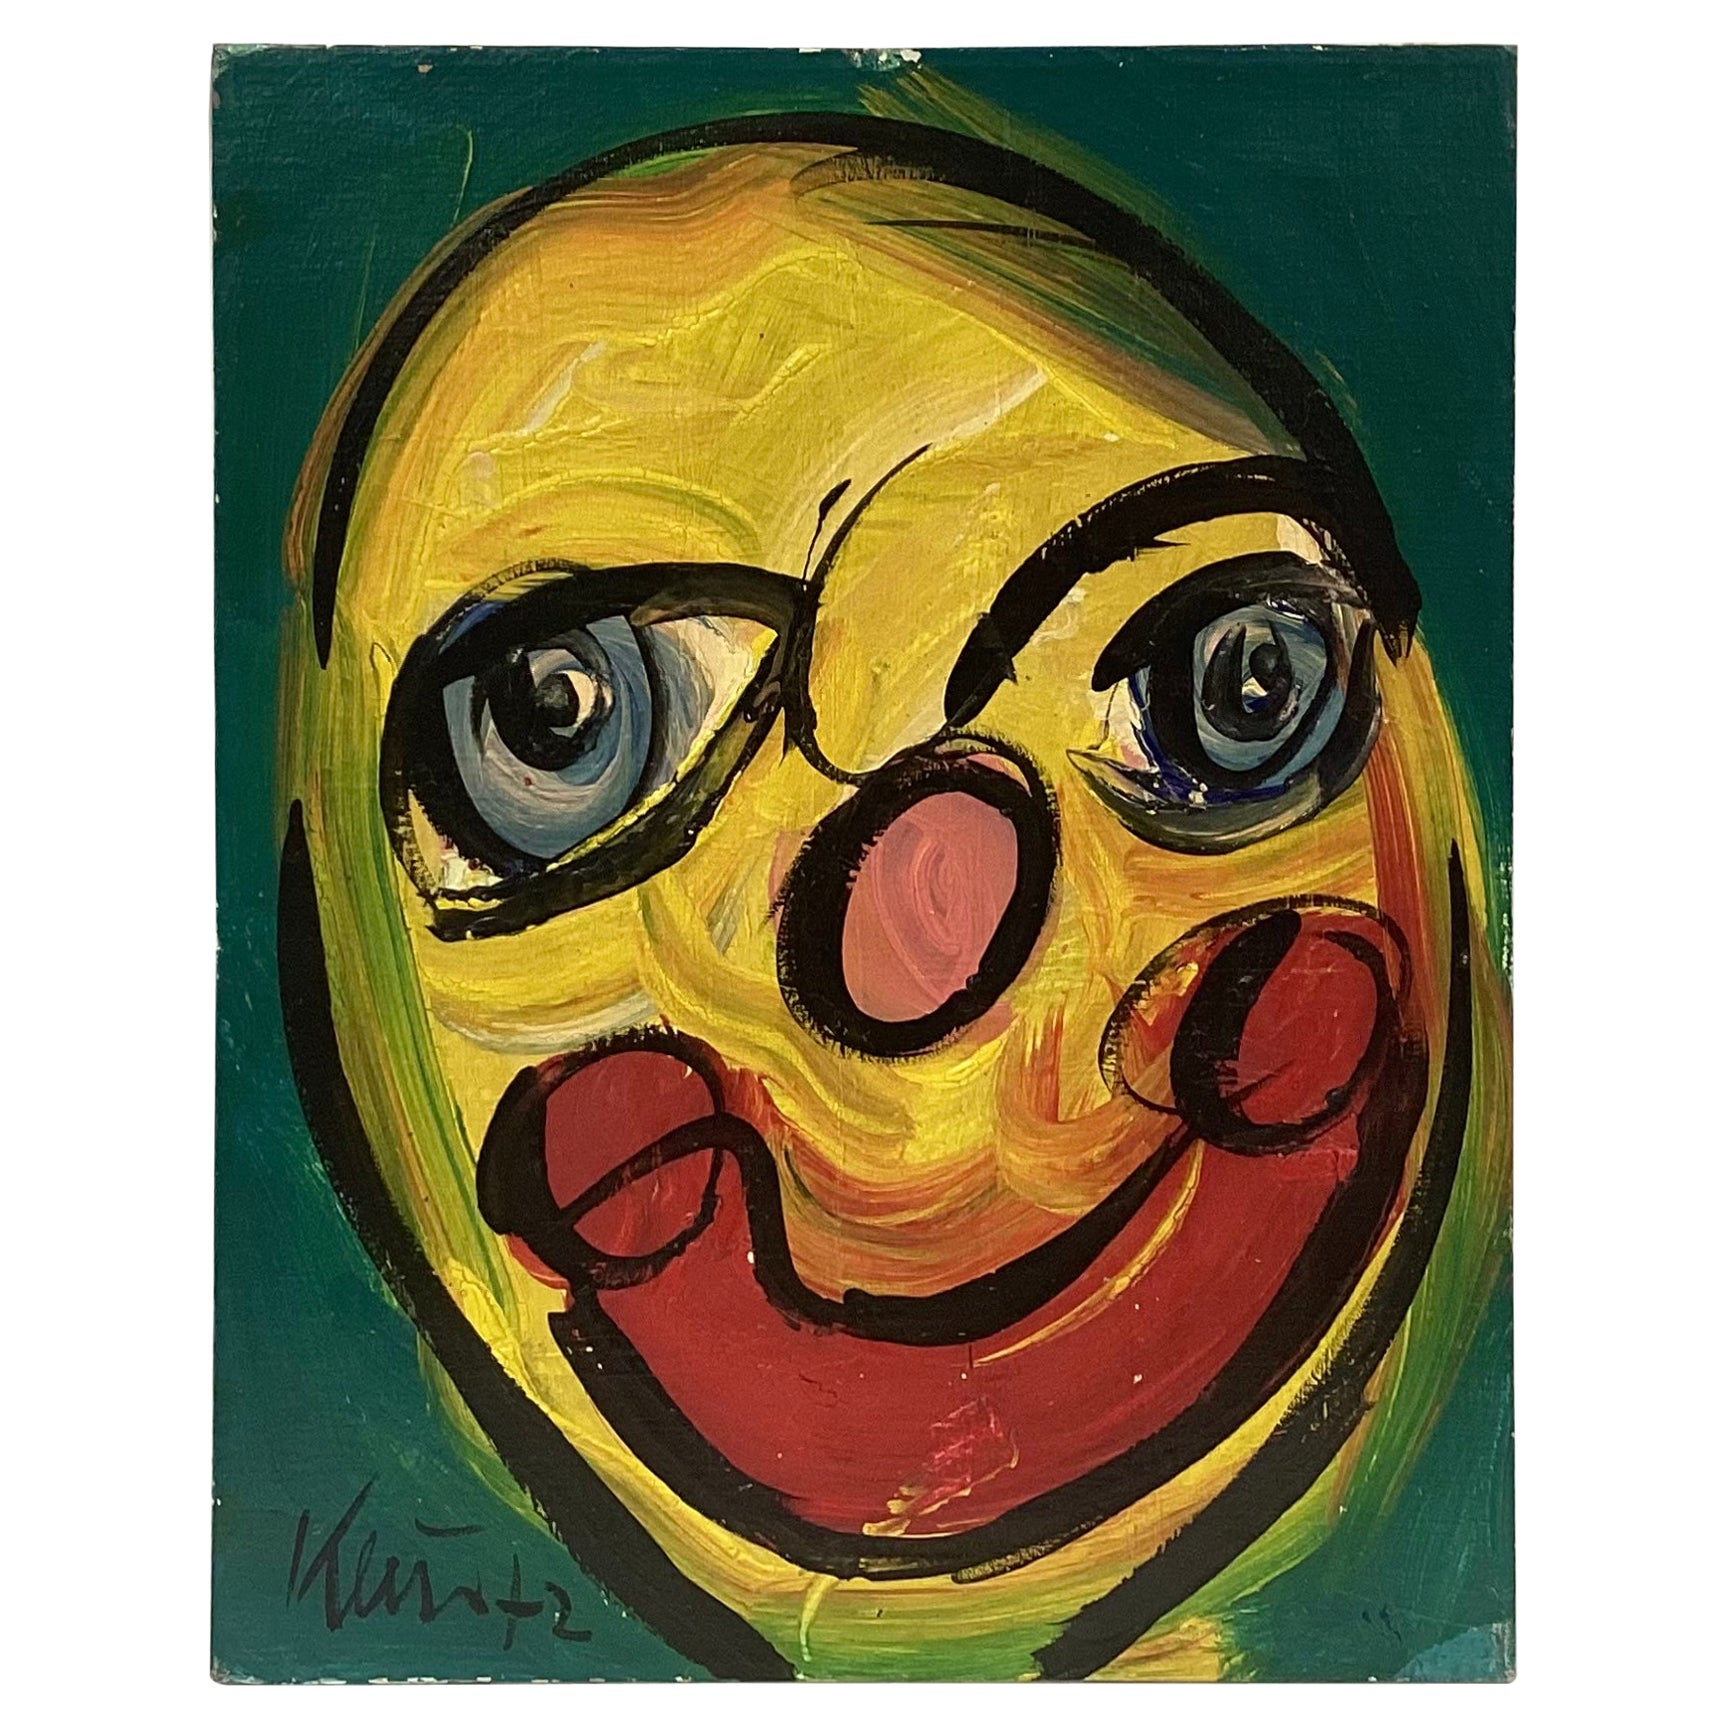 Peter Keil Oil On Canvas, 'The Clown' Painting For Sale